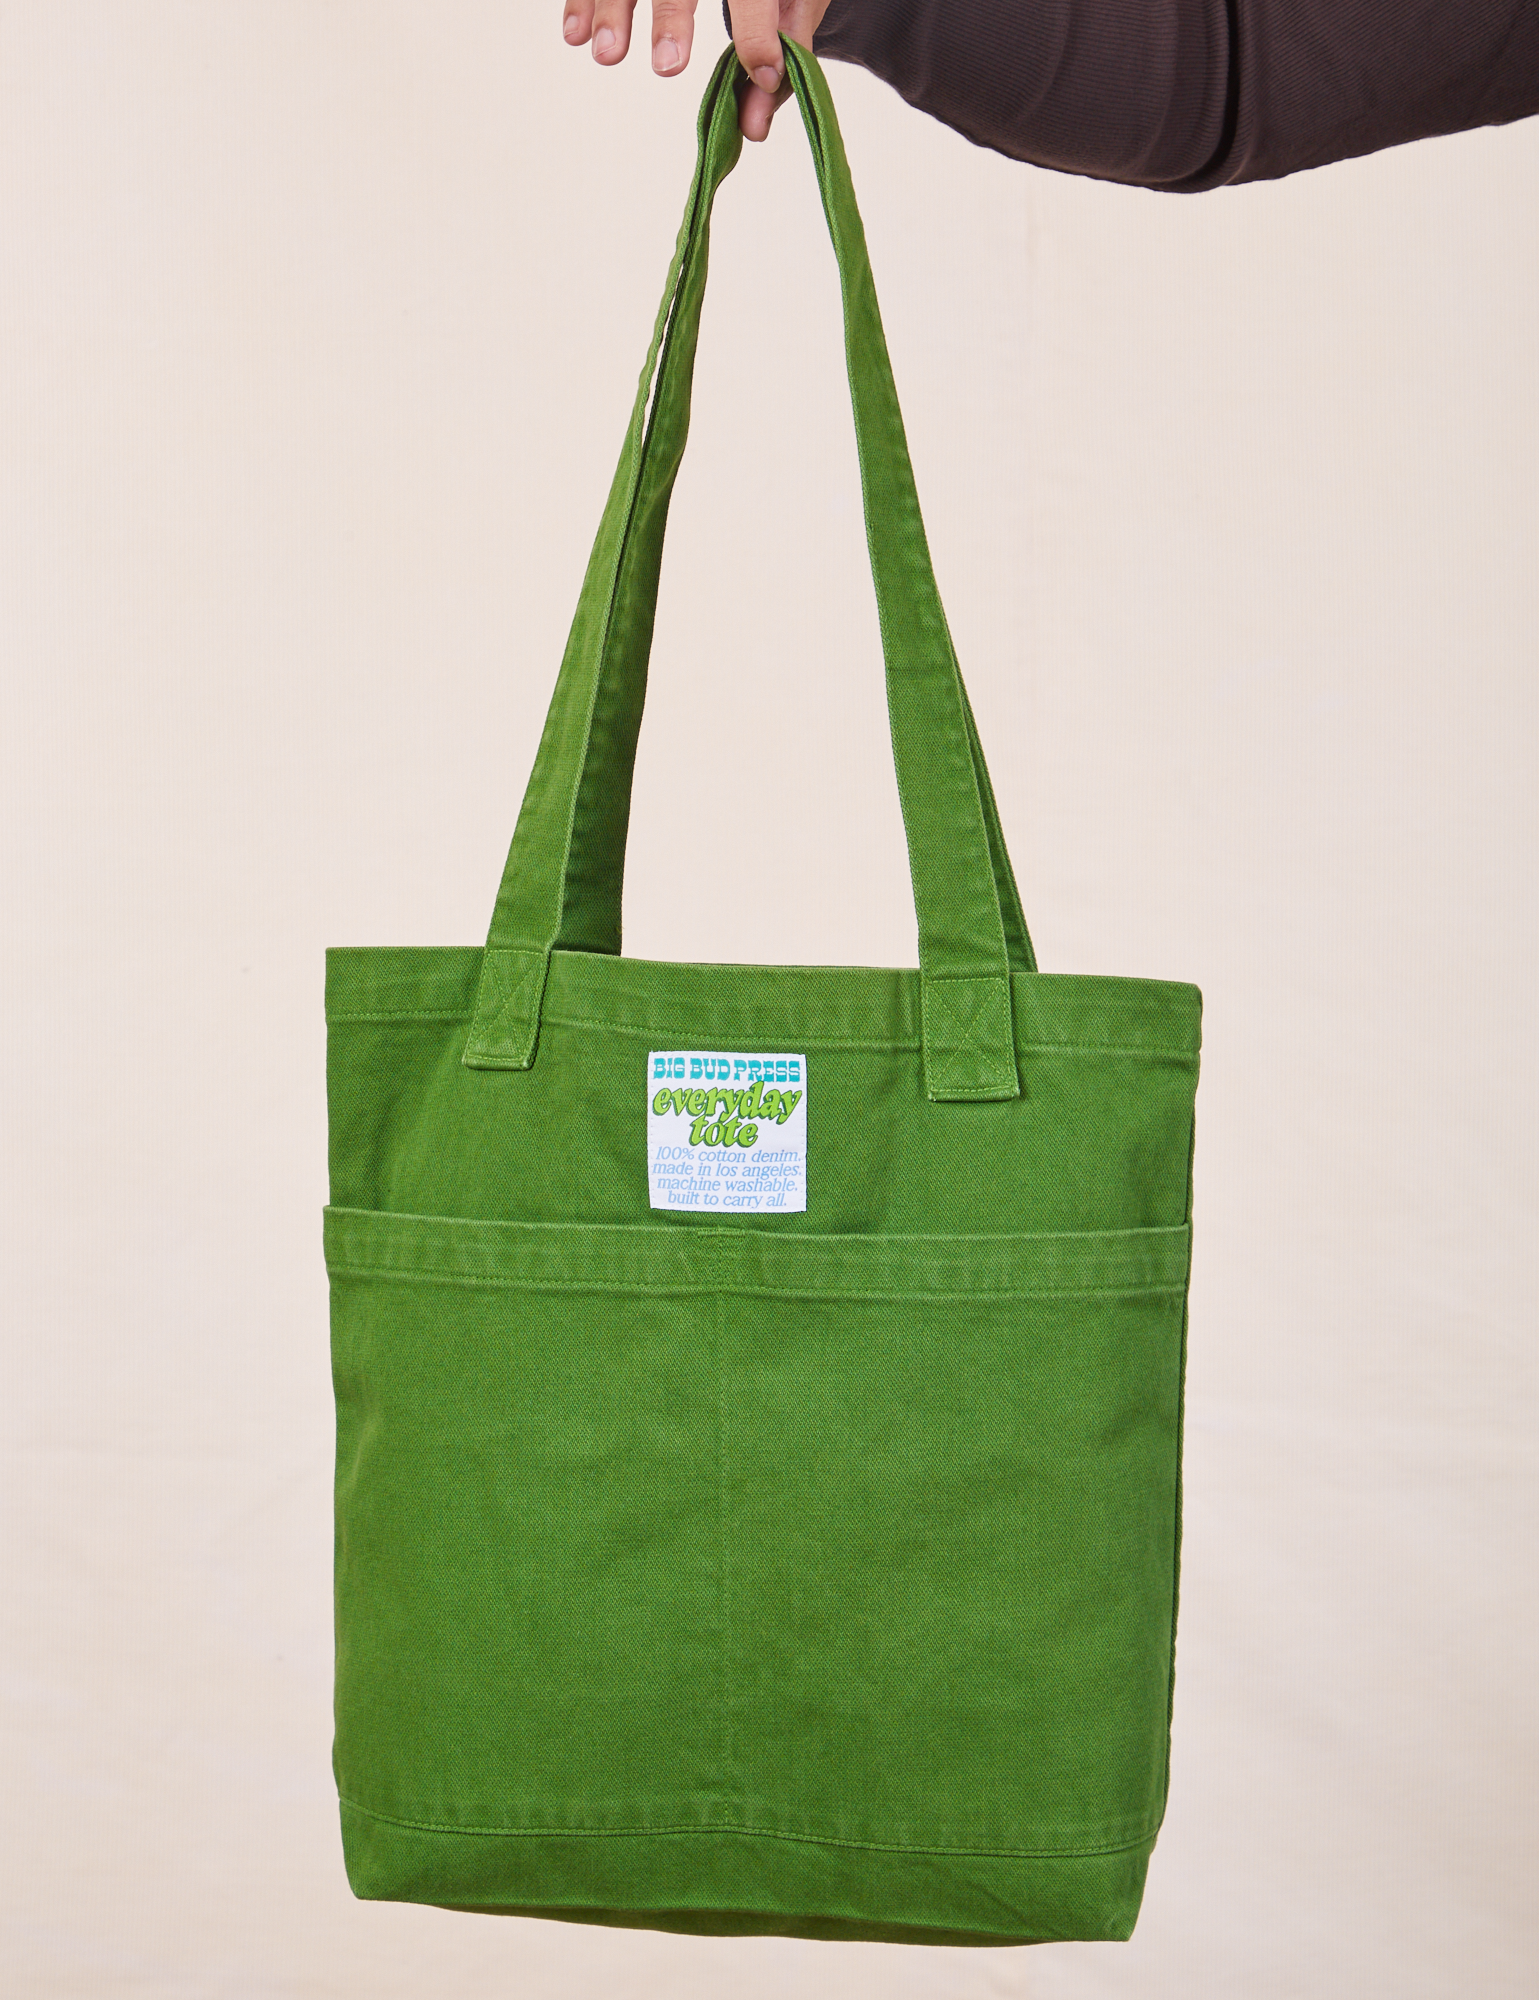 Everyday Tote Bag in Lawn Green